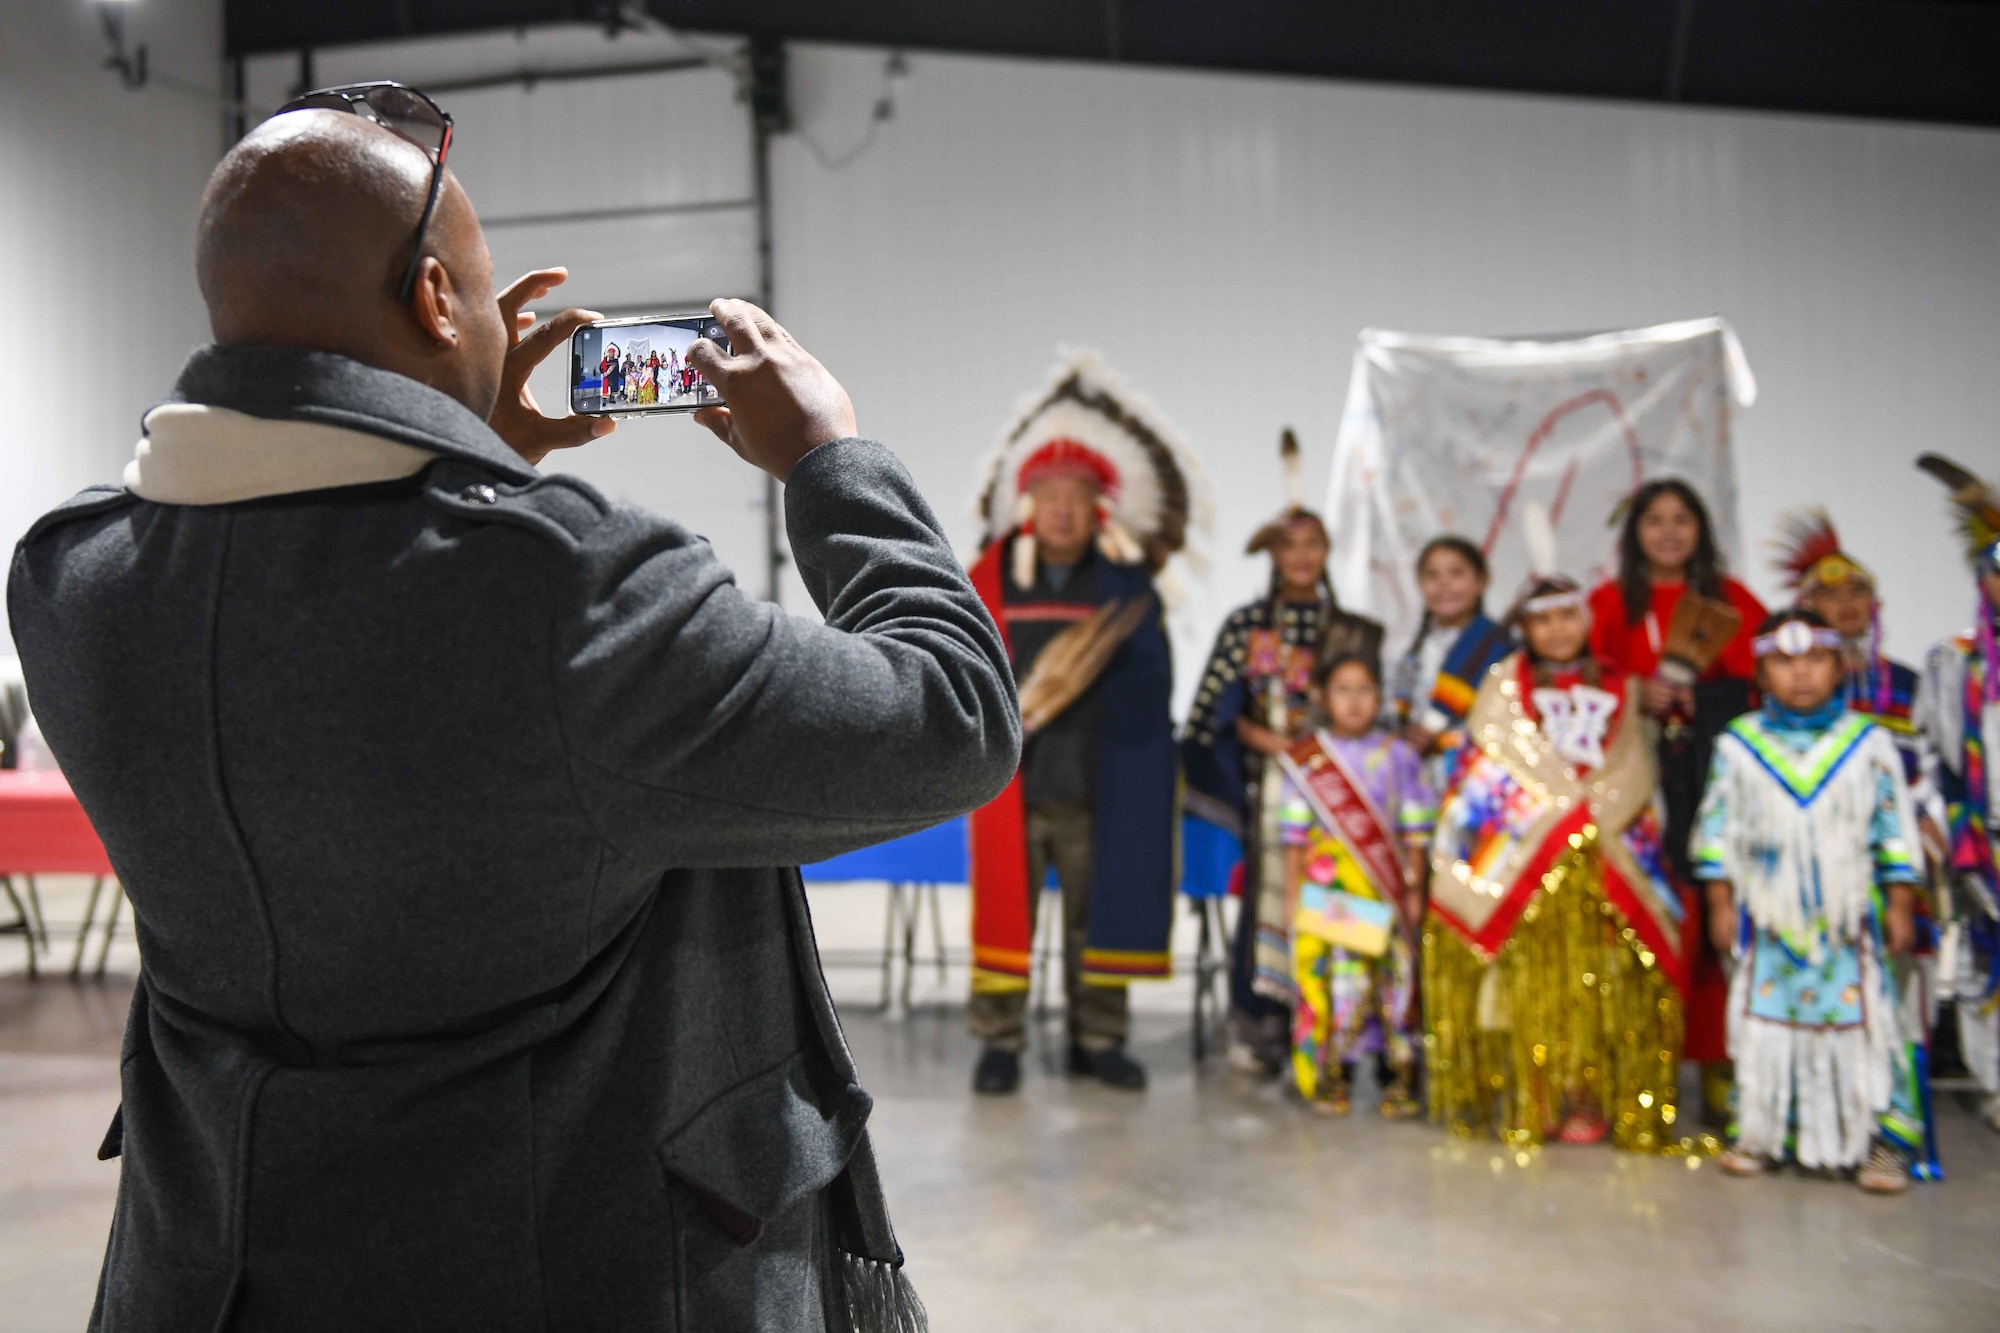 Col. Patrick Brady-Lee, 97th Air Mobility Wing vice commander snaps a picture of the Comanche Nation Youth Dancers along with Chief Jason Goodblanket of the Cheyenne Tribe at the Jackson County Expo Center Nov. 19, 2022, in Altus, Oklahoma. Brady-Lee, base personnel, and other Altus community members were asked to jump in with the dancers near the end of the performance. (U.S. Air Force photo by Airman 1st Class Kari Degraffenreed)